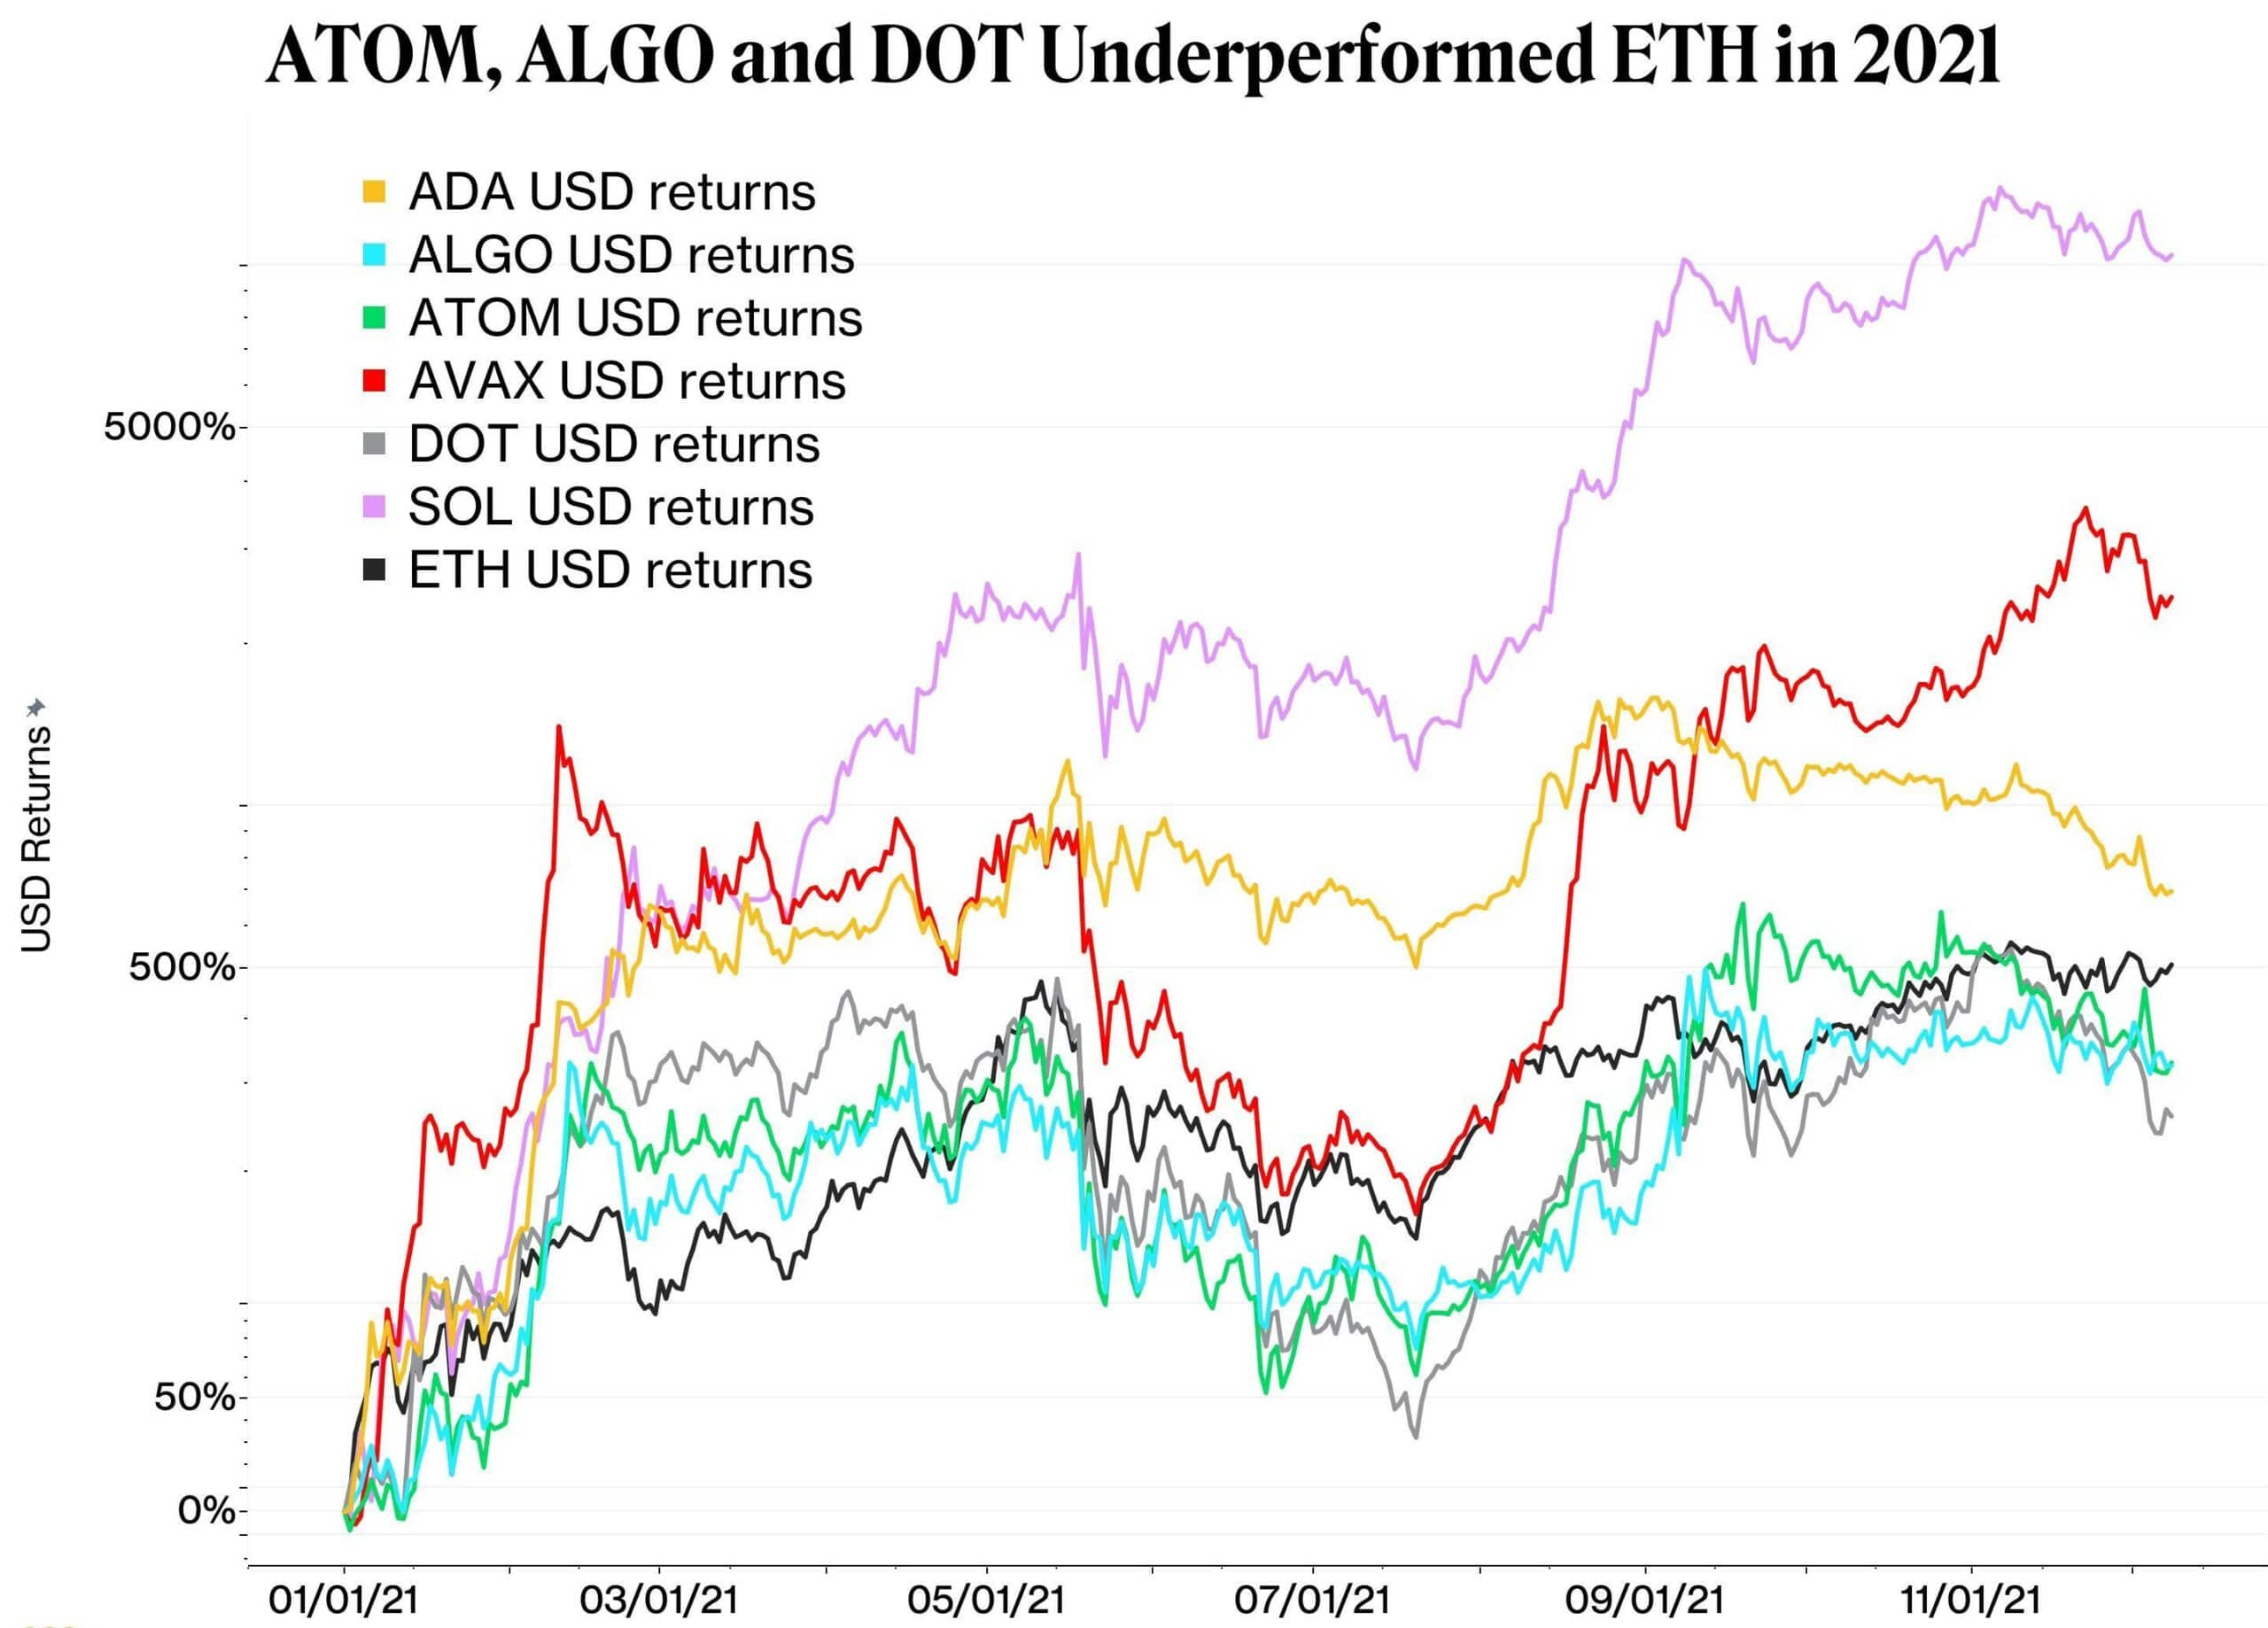 Altcoin year-to-date returns in US Dollars using a logarithmic scale